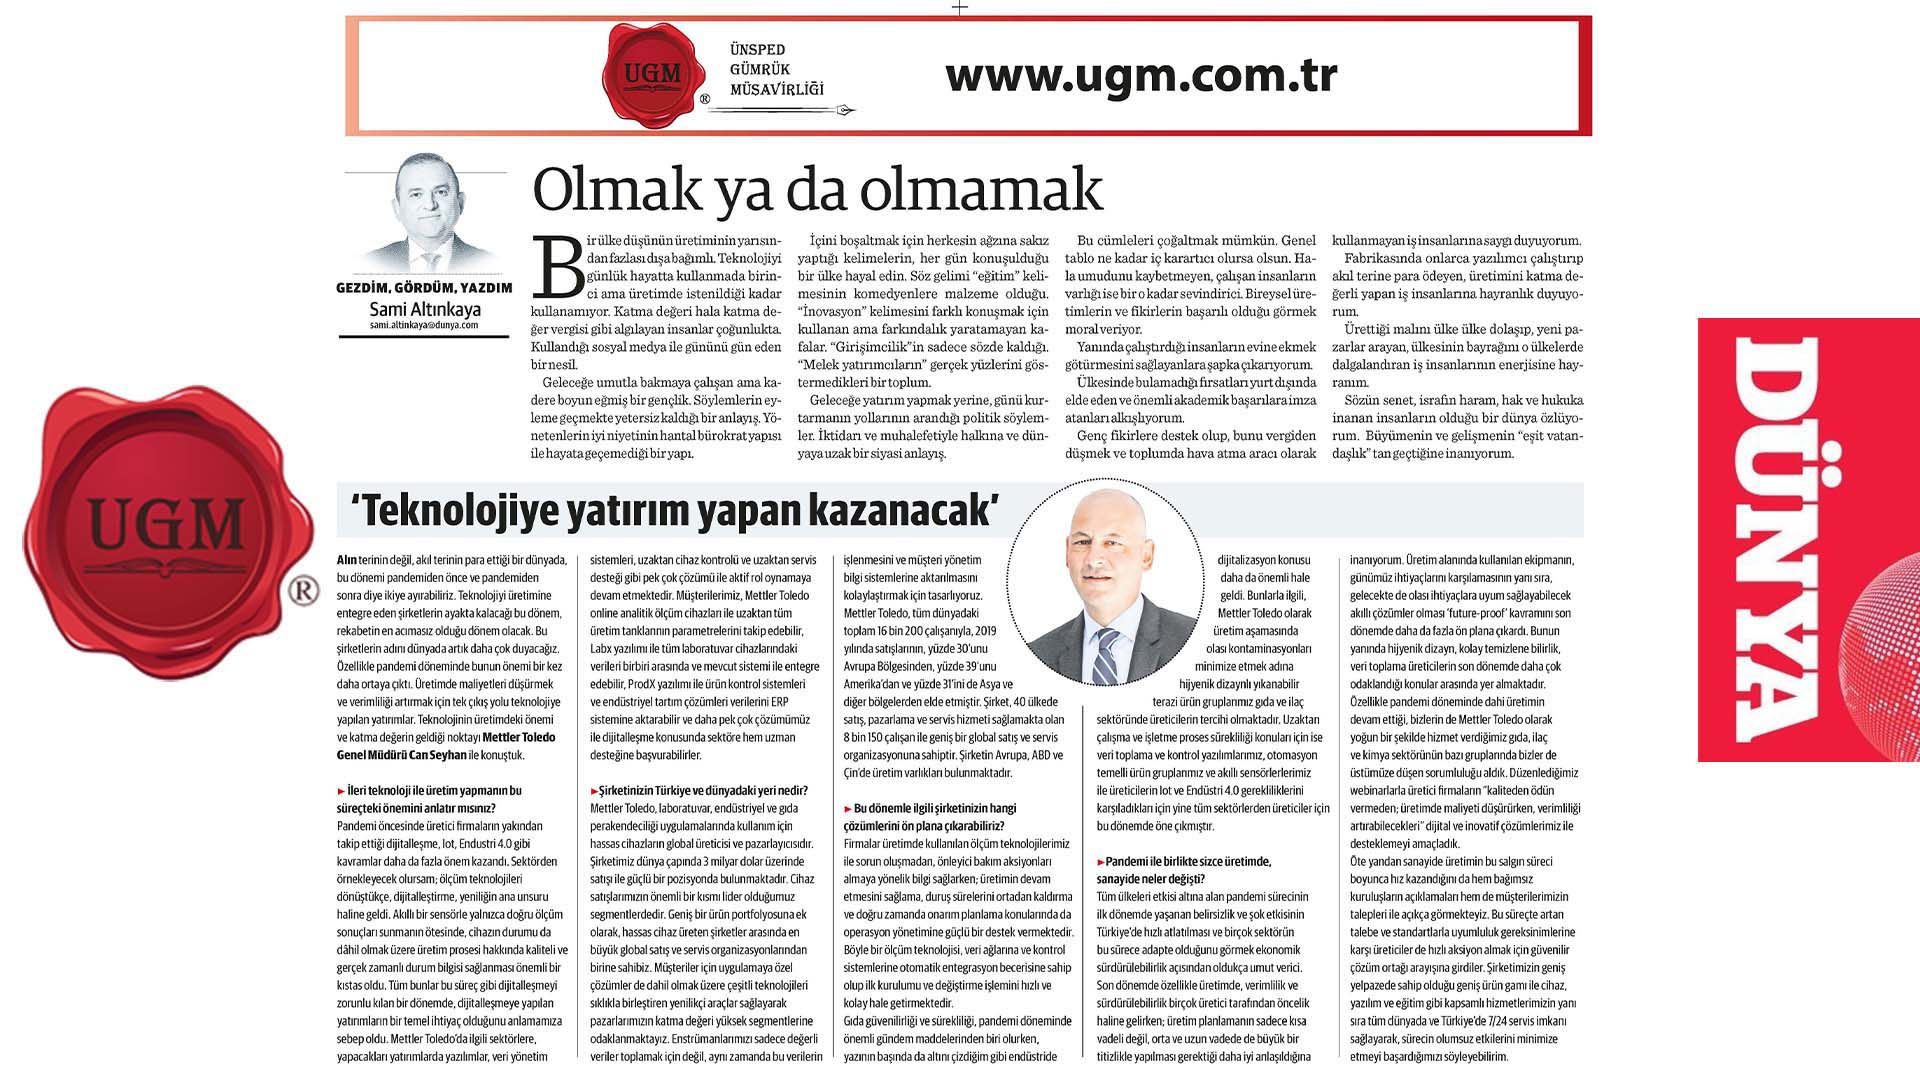 Our UGM Corporate Communications Director Sami Altınkaya's article entitled "To be or not to be" was published in the Dünya newspaper on 13.07.2020.